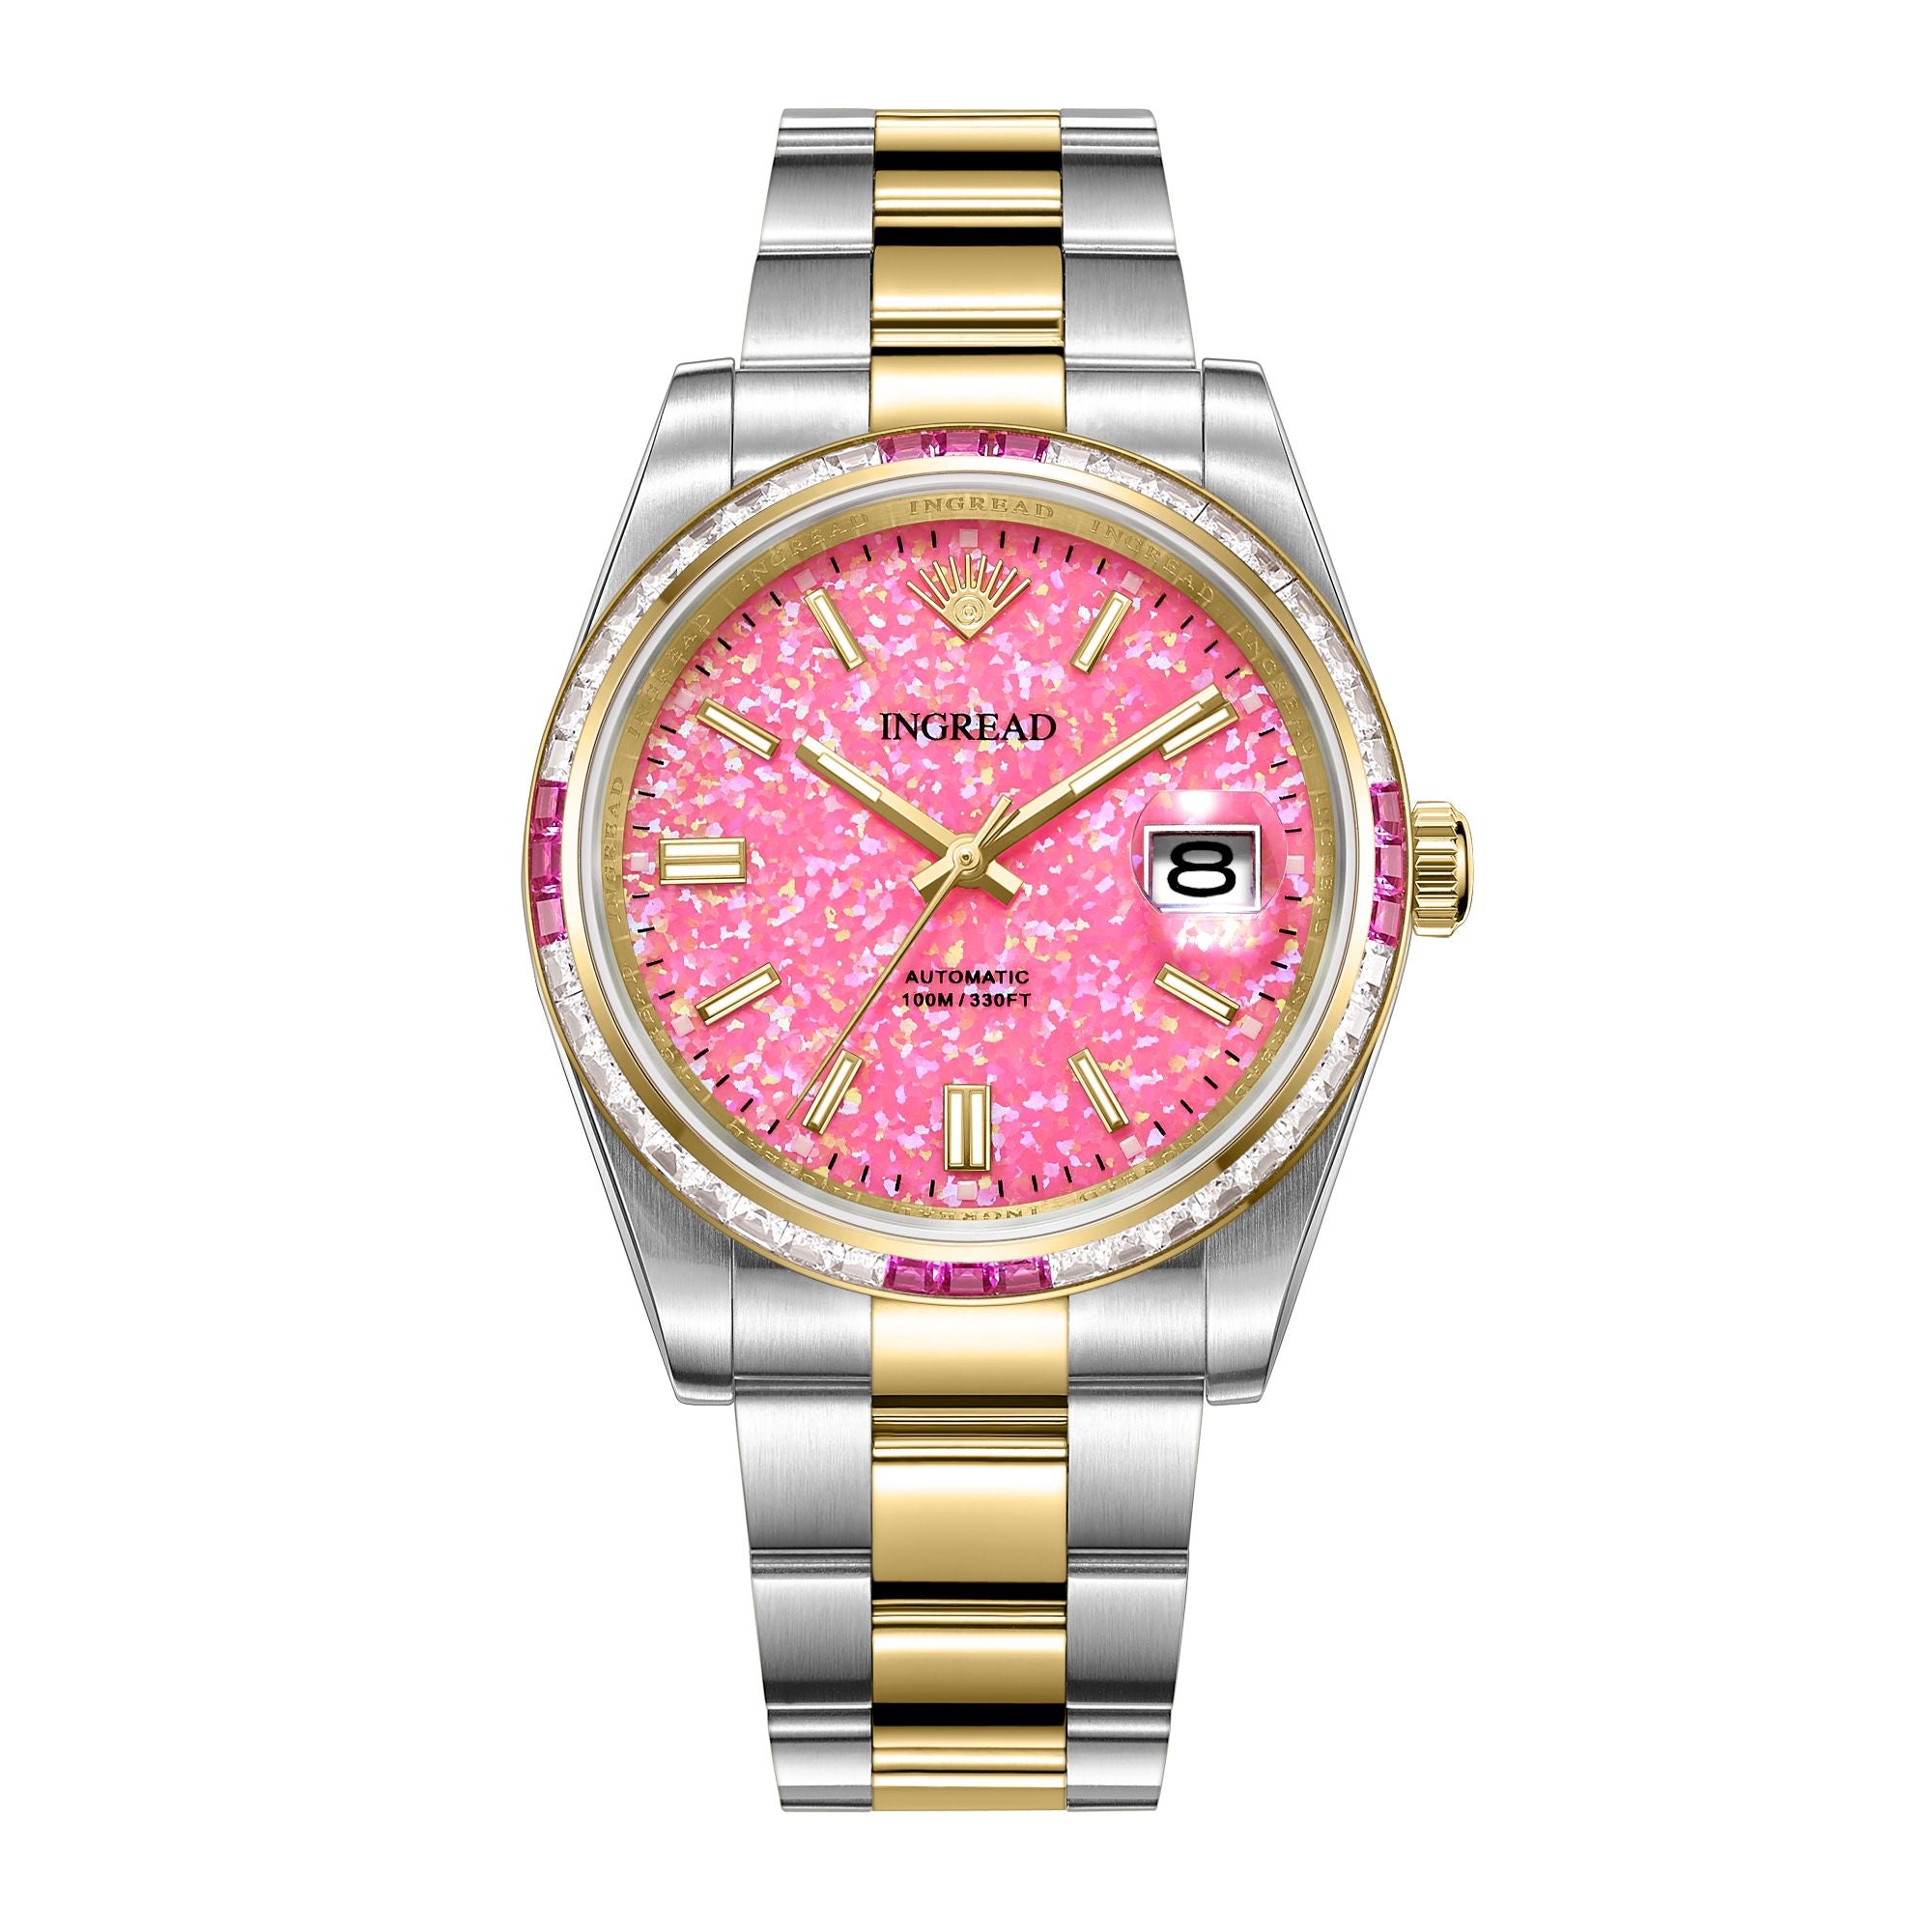 Natural Pink Opal Dial with Zircon Gems, Sapphire Crystal, 40mm, Stainless Steel, IN-23006-FF